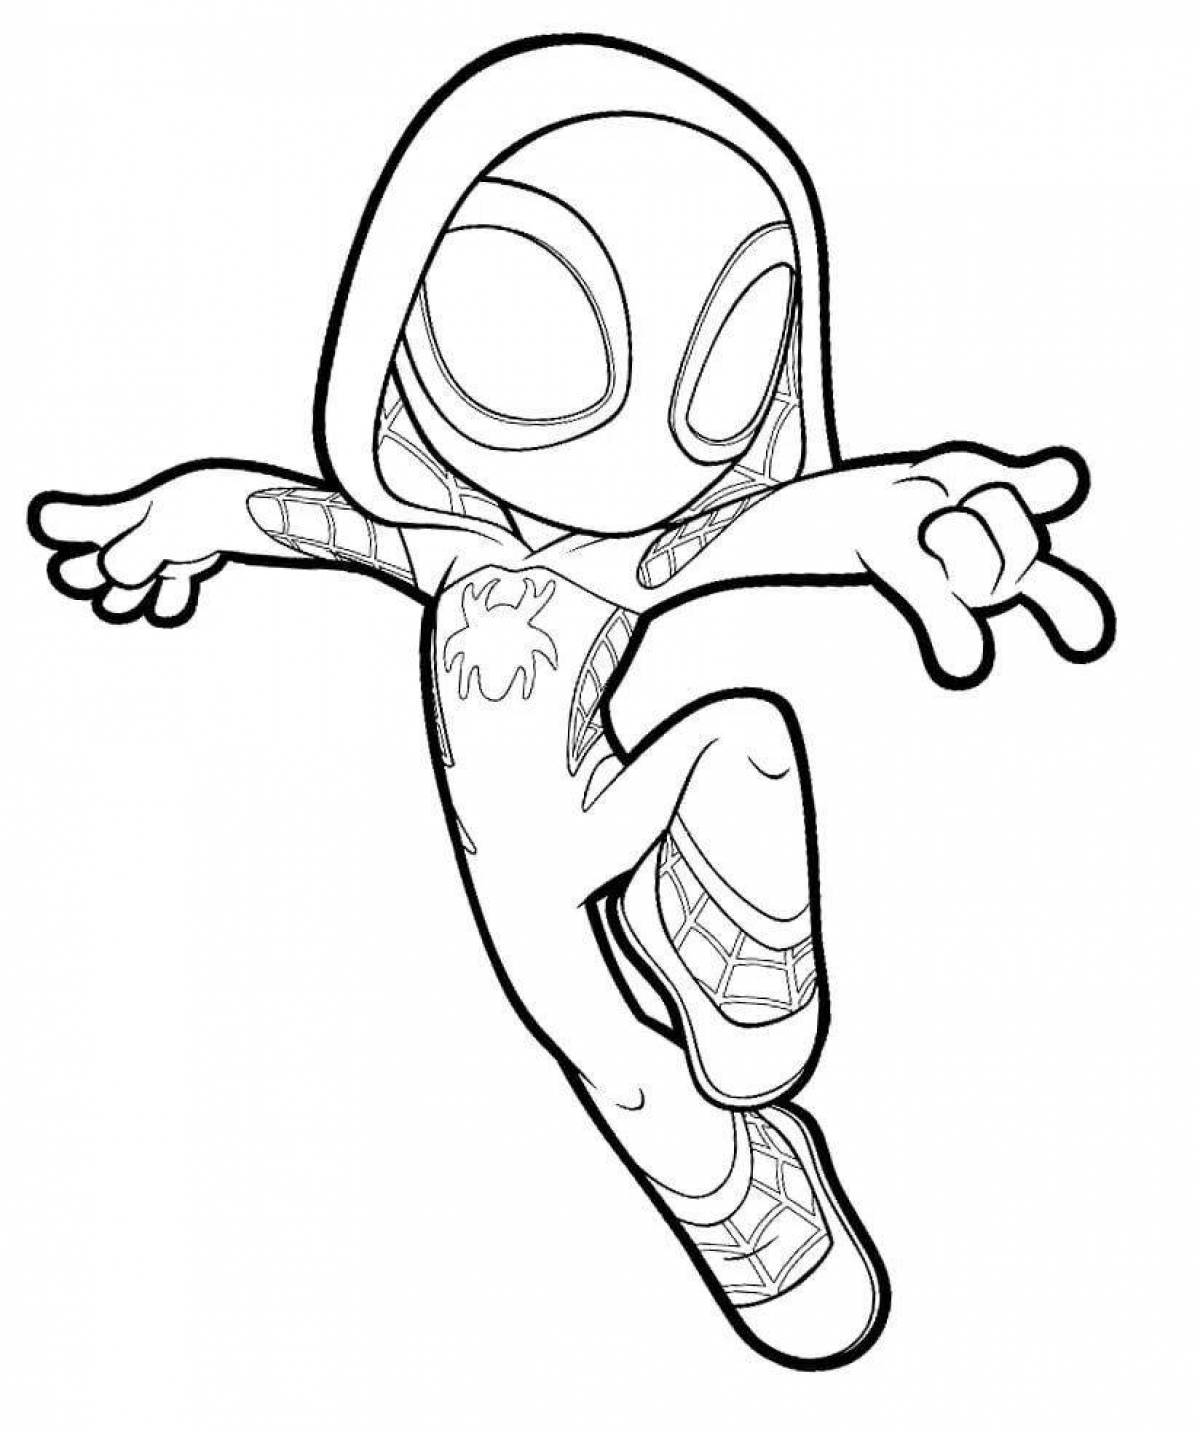 Spider gwen's wonderful coloring page